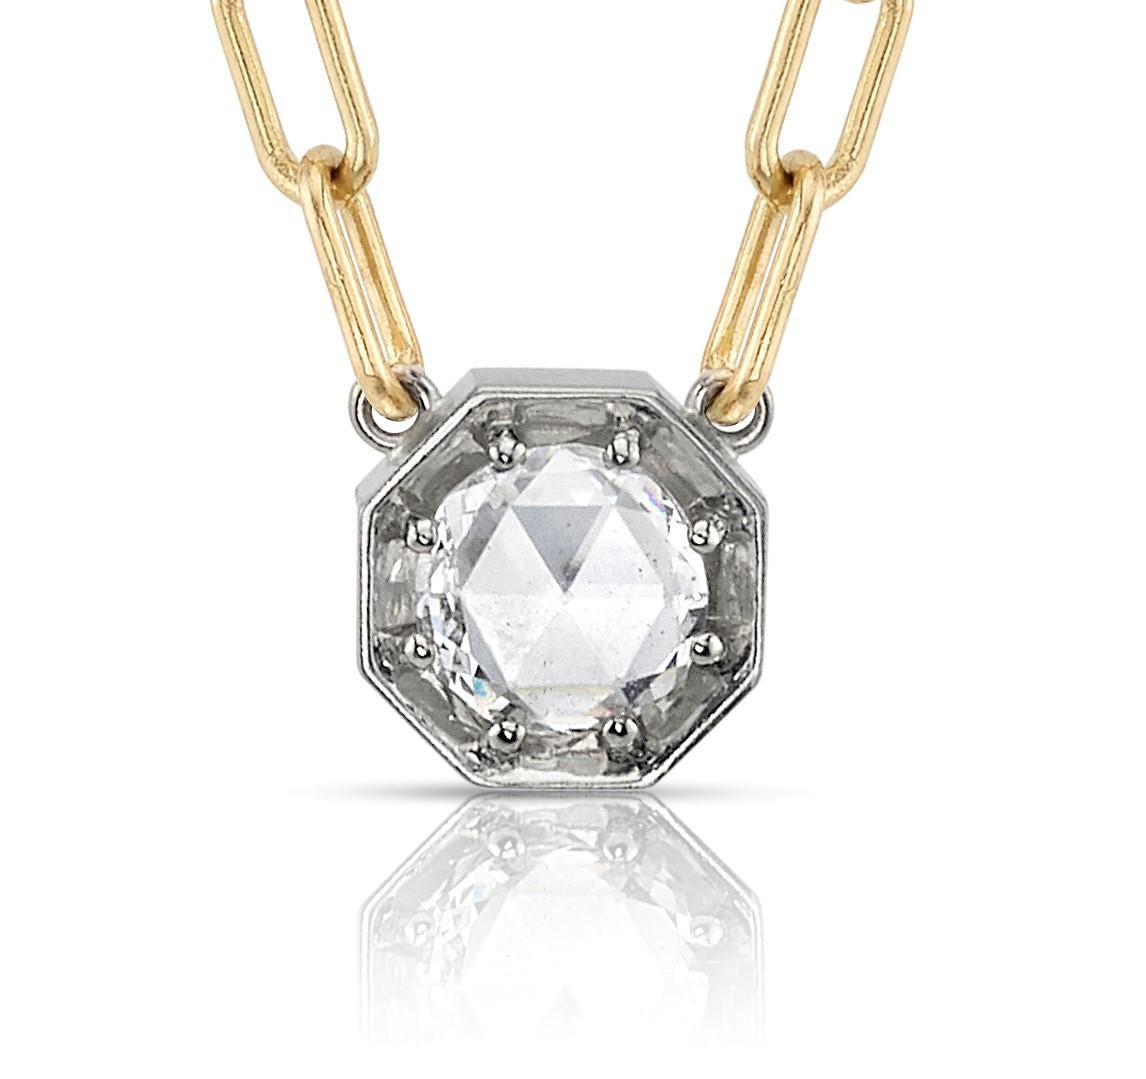 0.66ct E/SI1 GIA certified rose cut diamond prong set in a handcrafted 18K yellow and champagne white gold pendant necklace.

Necklace measures 17